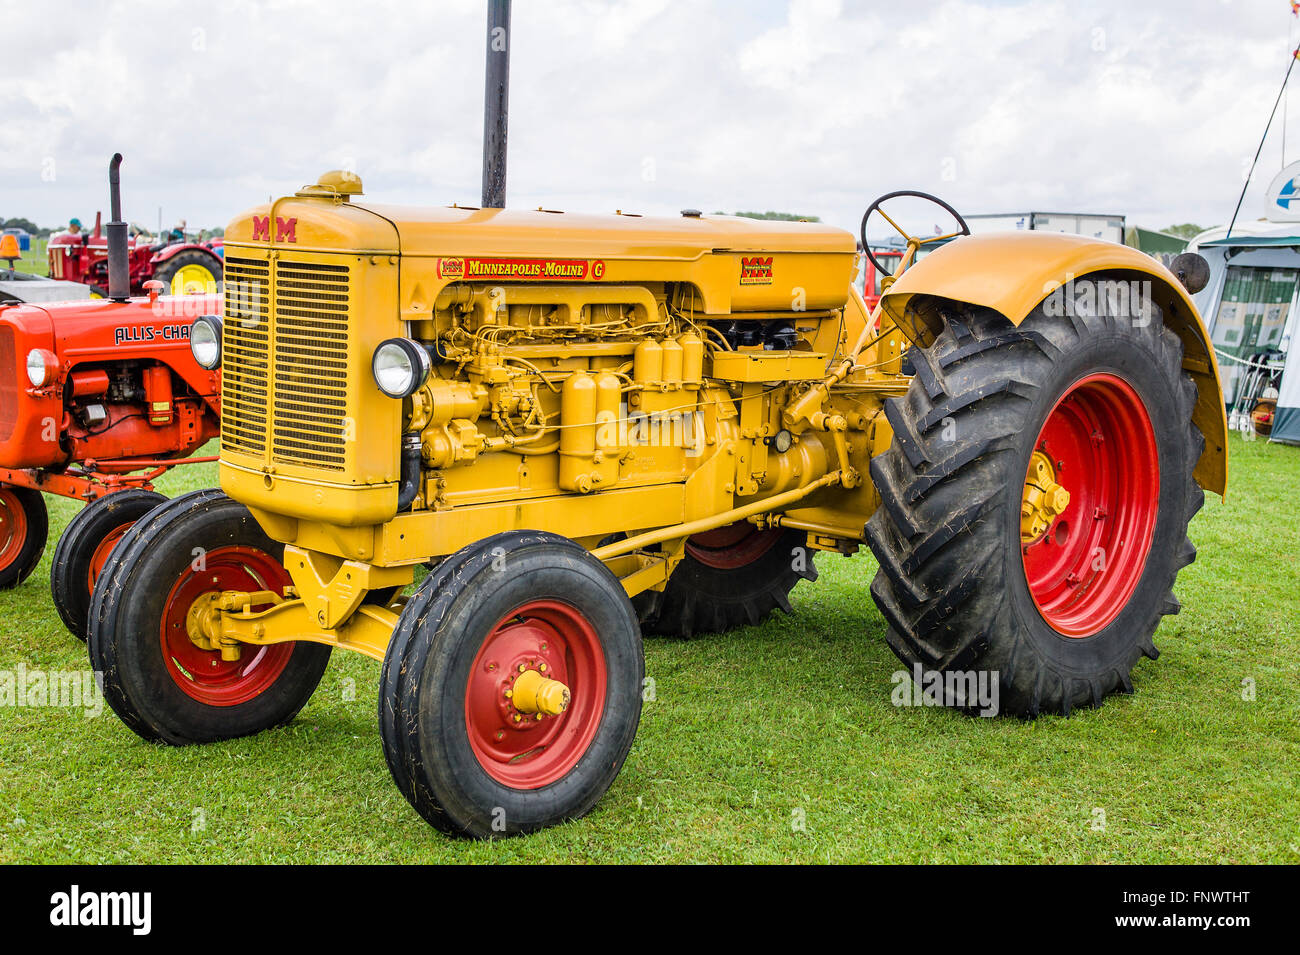 Old Minneapolis Moline farm tractor on show in UK Stock Photo